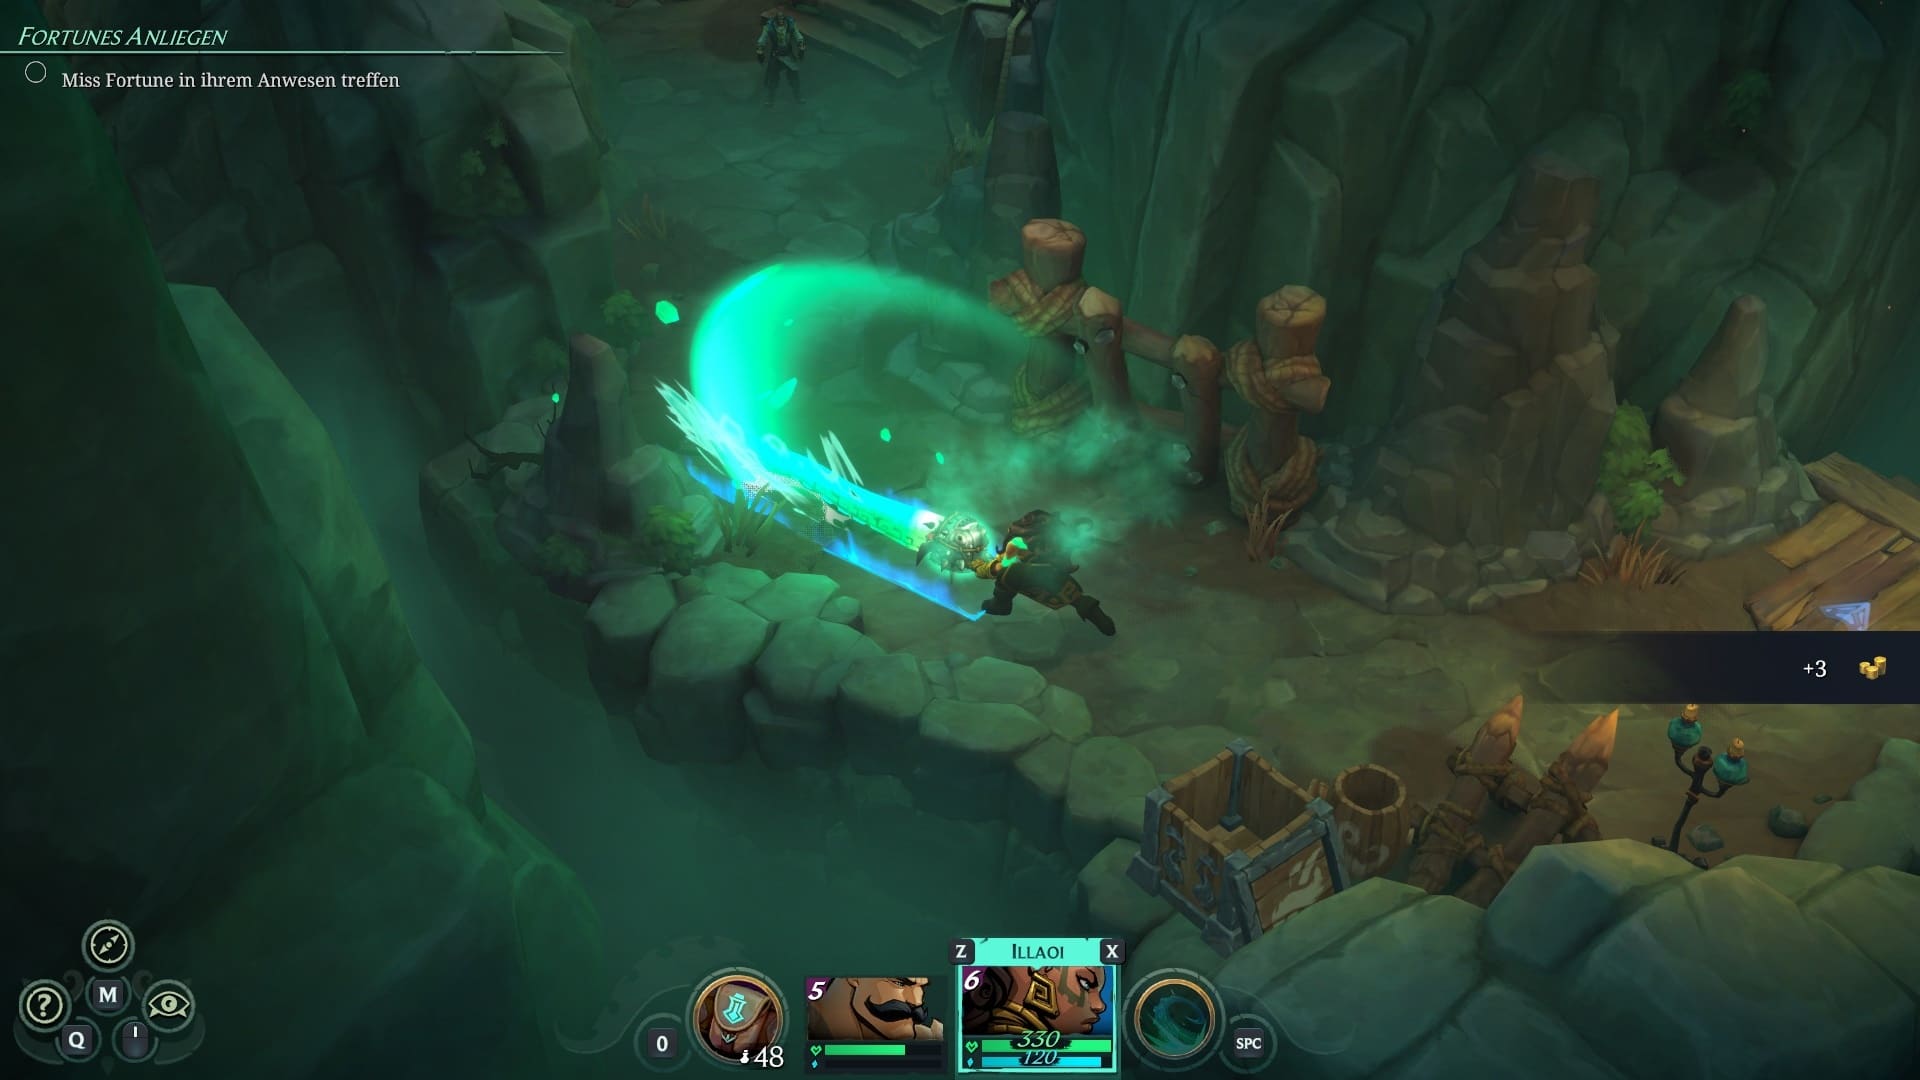 Every champion has abilities that they can use outside of the battle screen. For example, we could use this tentacle strike to catch enemies off guard.